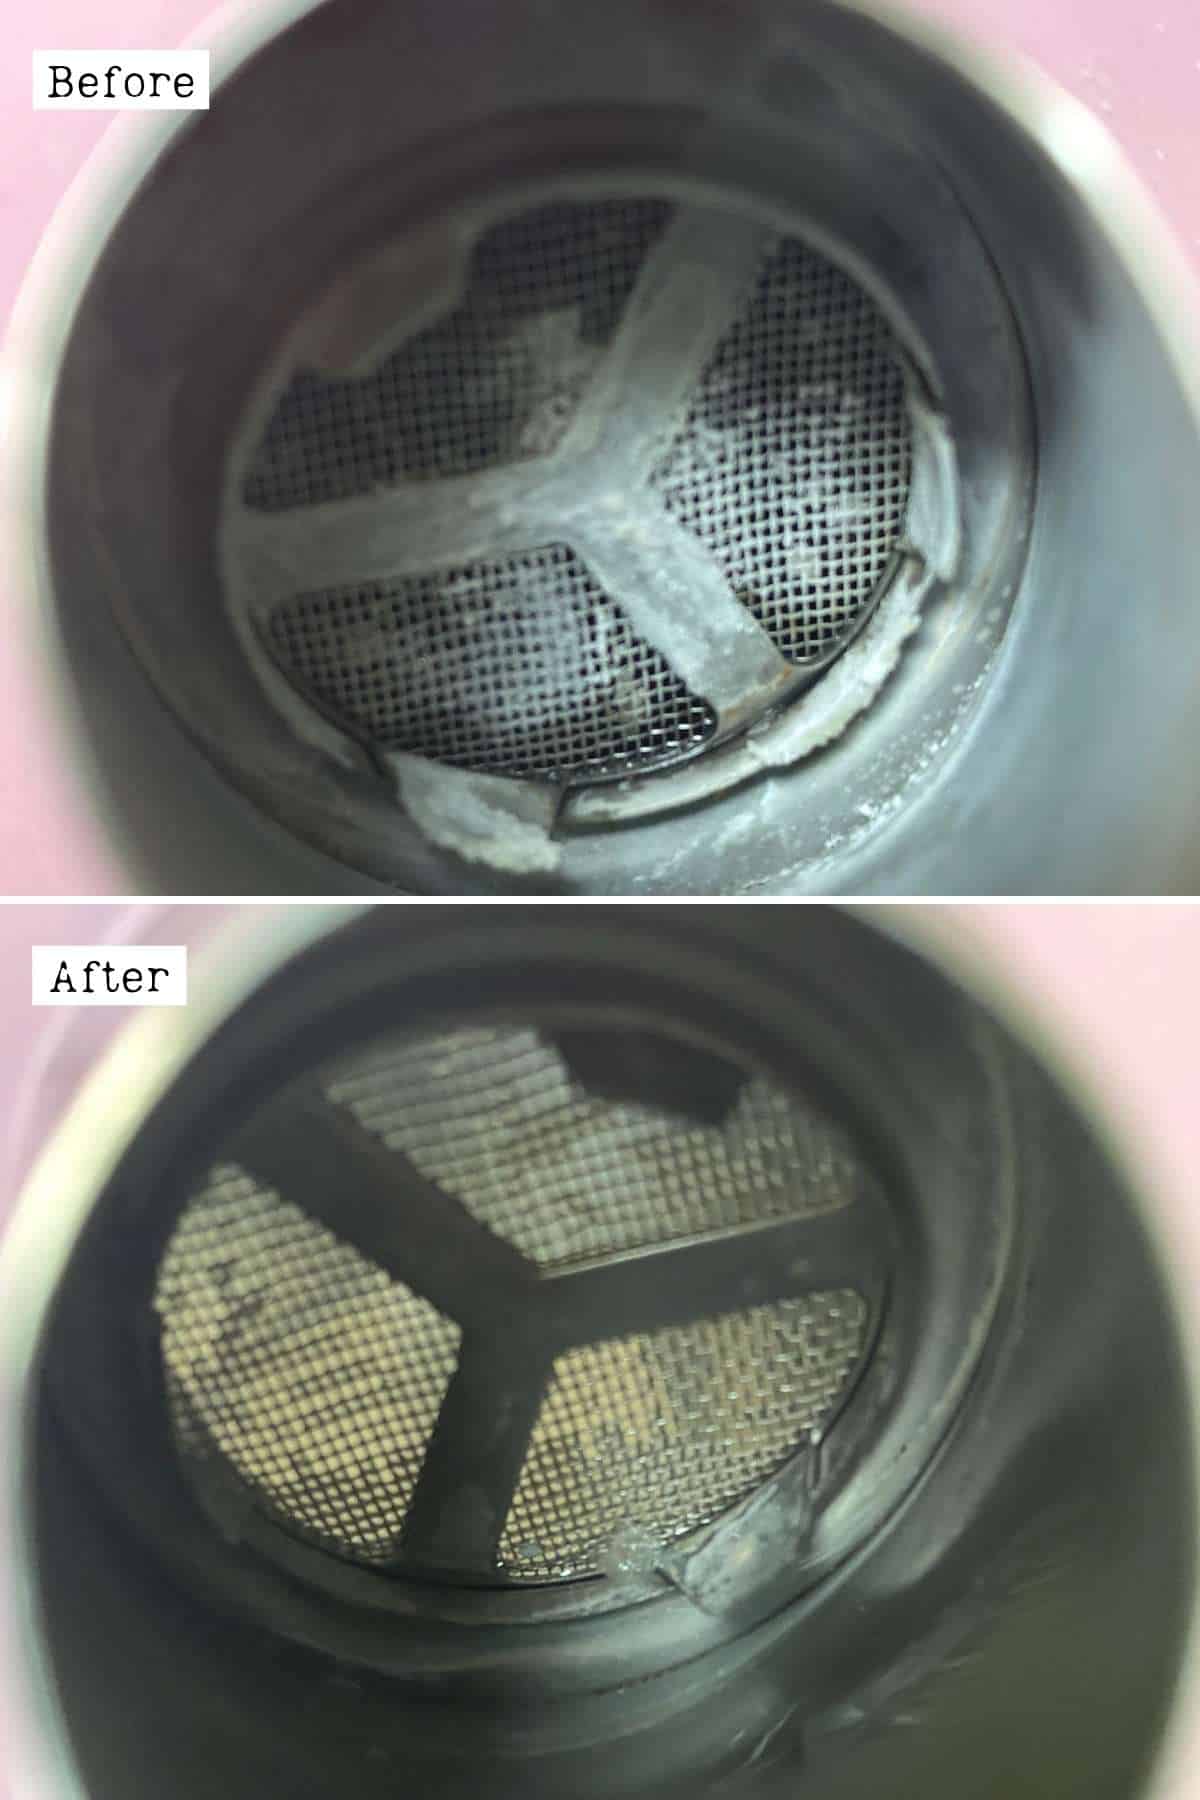 Before and after cleaning a kettle nozzle